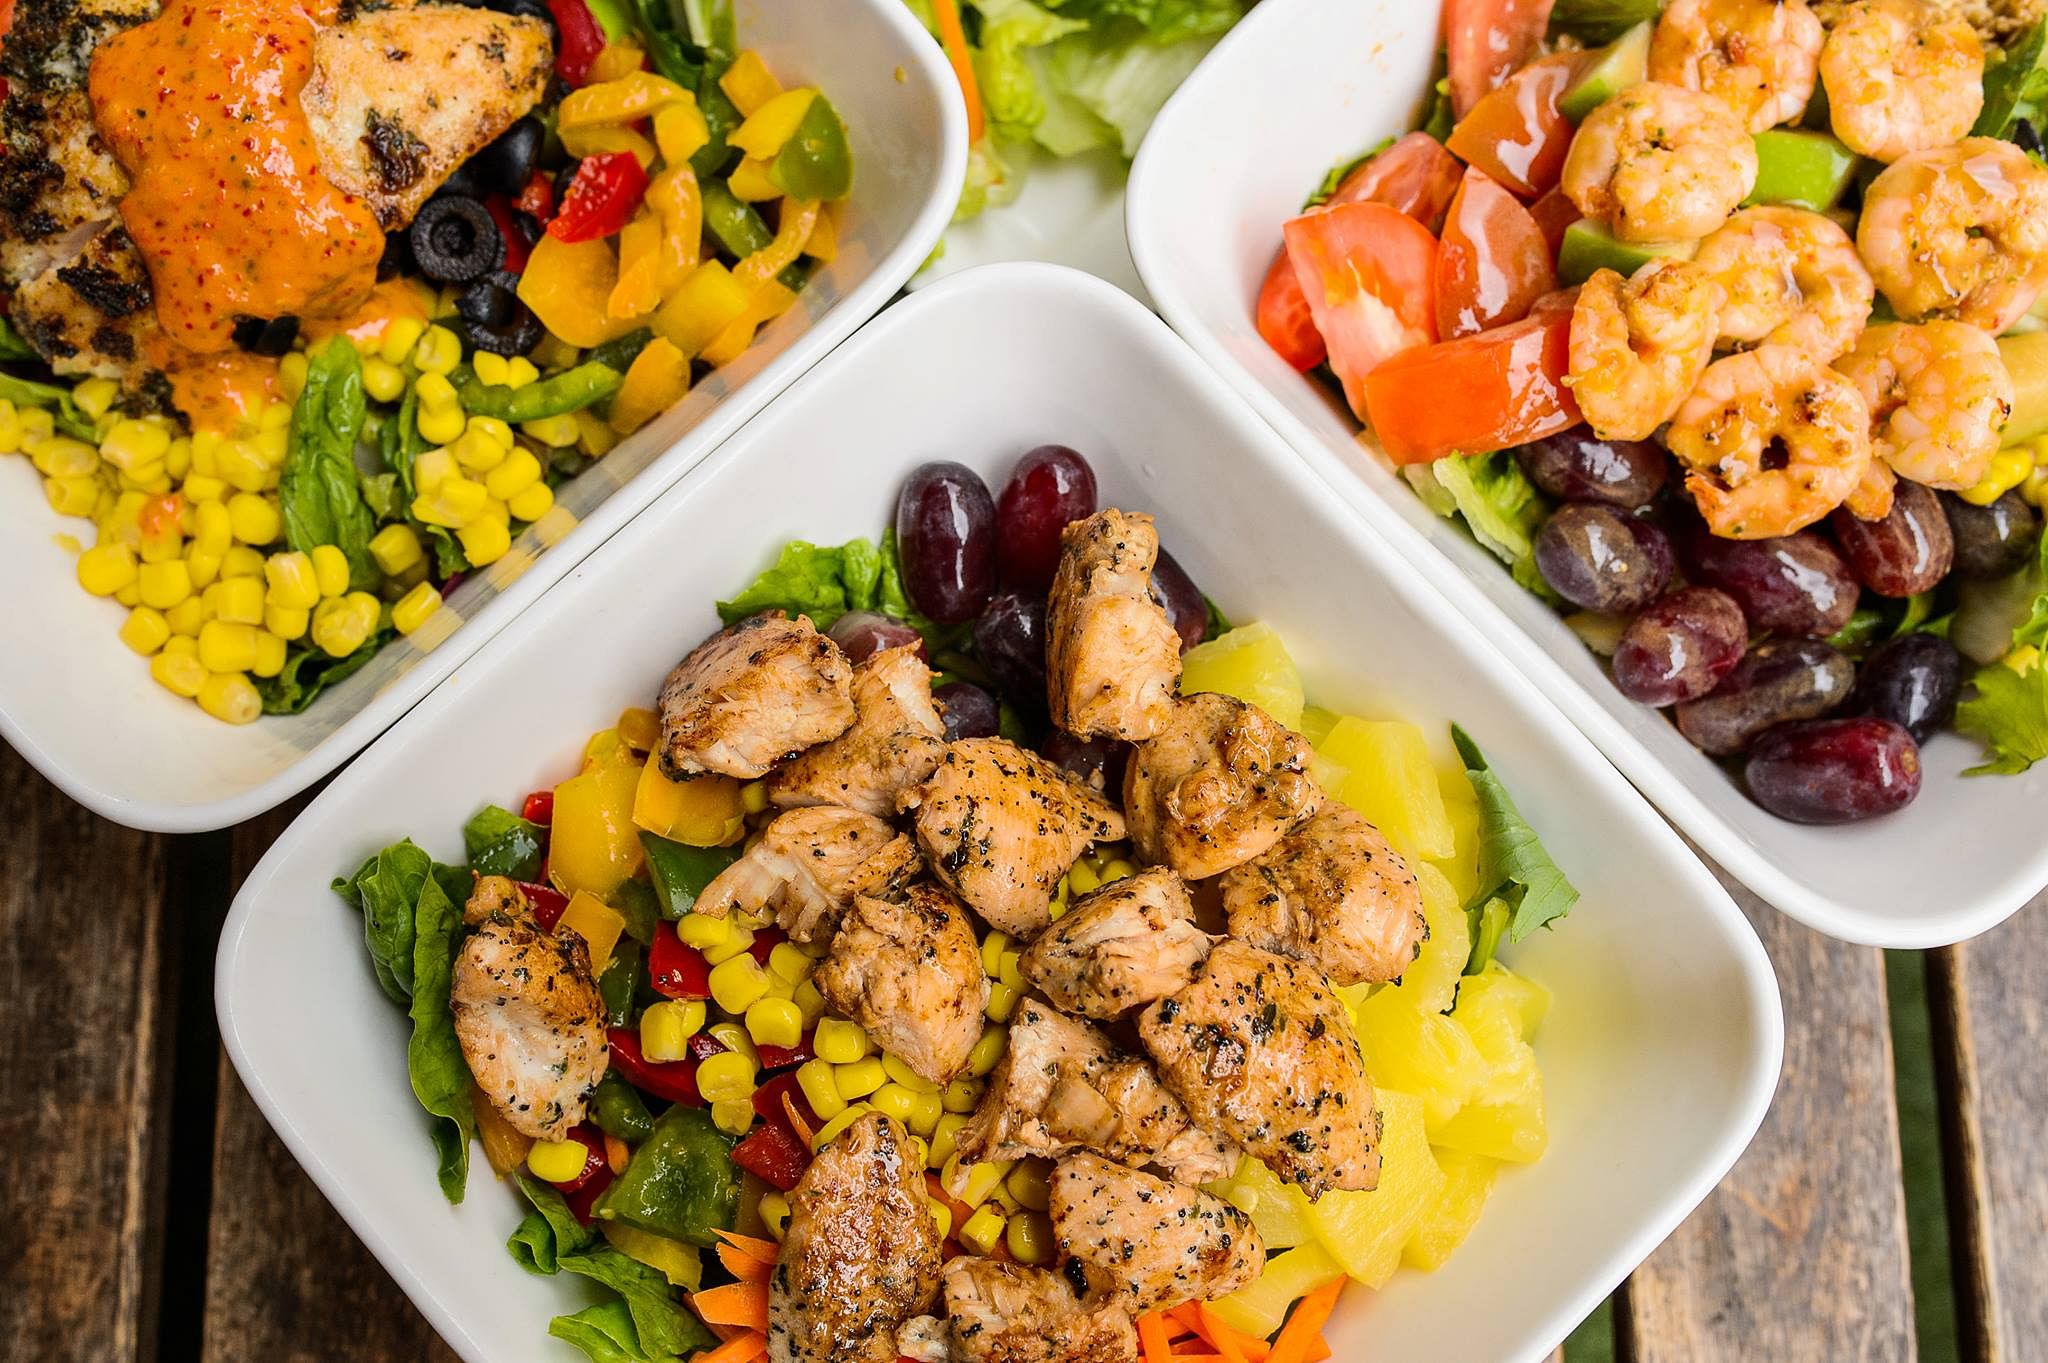 5 food delivery services for healthy and delicious meals - the lawn